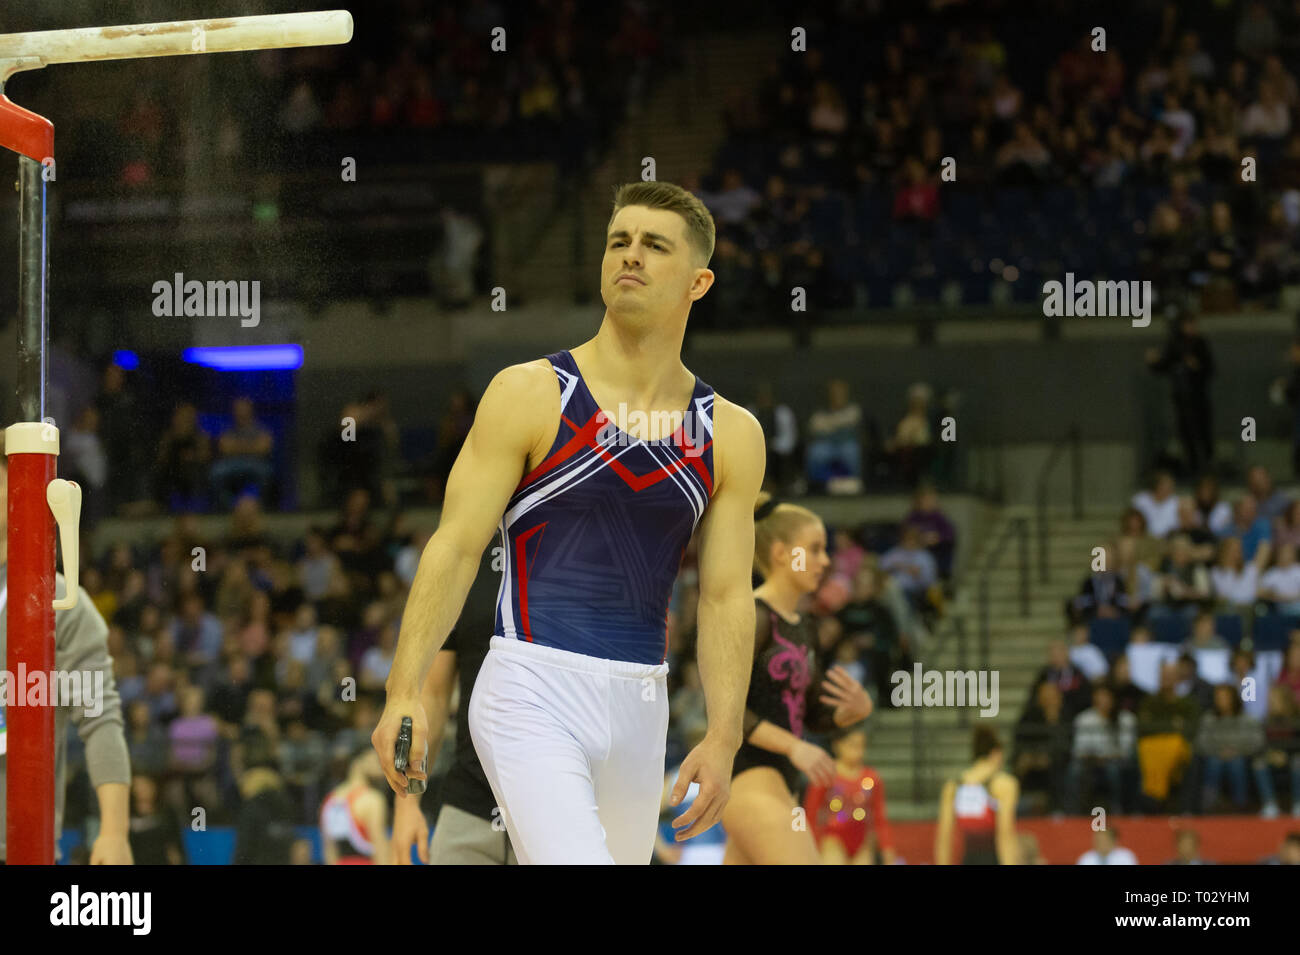 Liverpool, UK. 16th March 2019. Max Whitlock, MBE of South Essex Gymnastics competing at the Men’s and Women’s Artistic British Championships 2019, M&S Bank Arena, Liverpool, UK. Credit: Iain Scott Photography/Alamy Live News Stock Photo